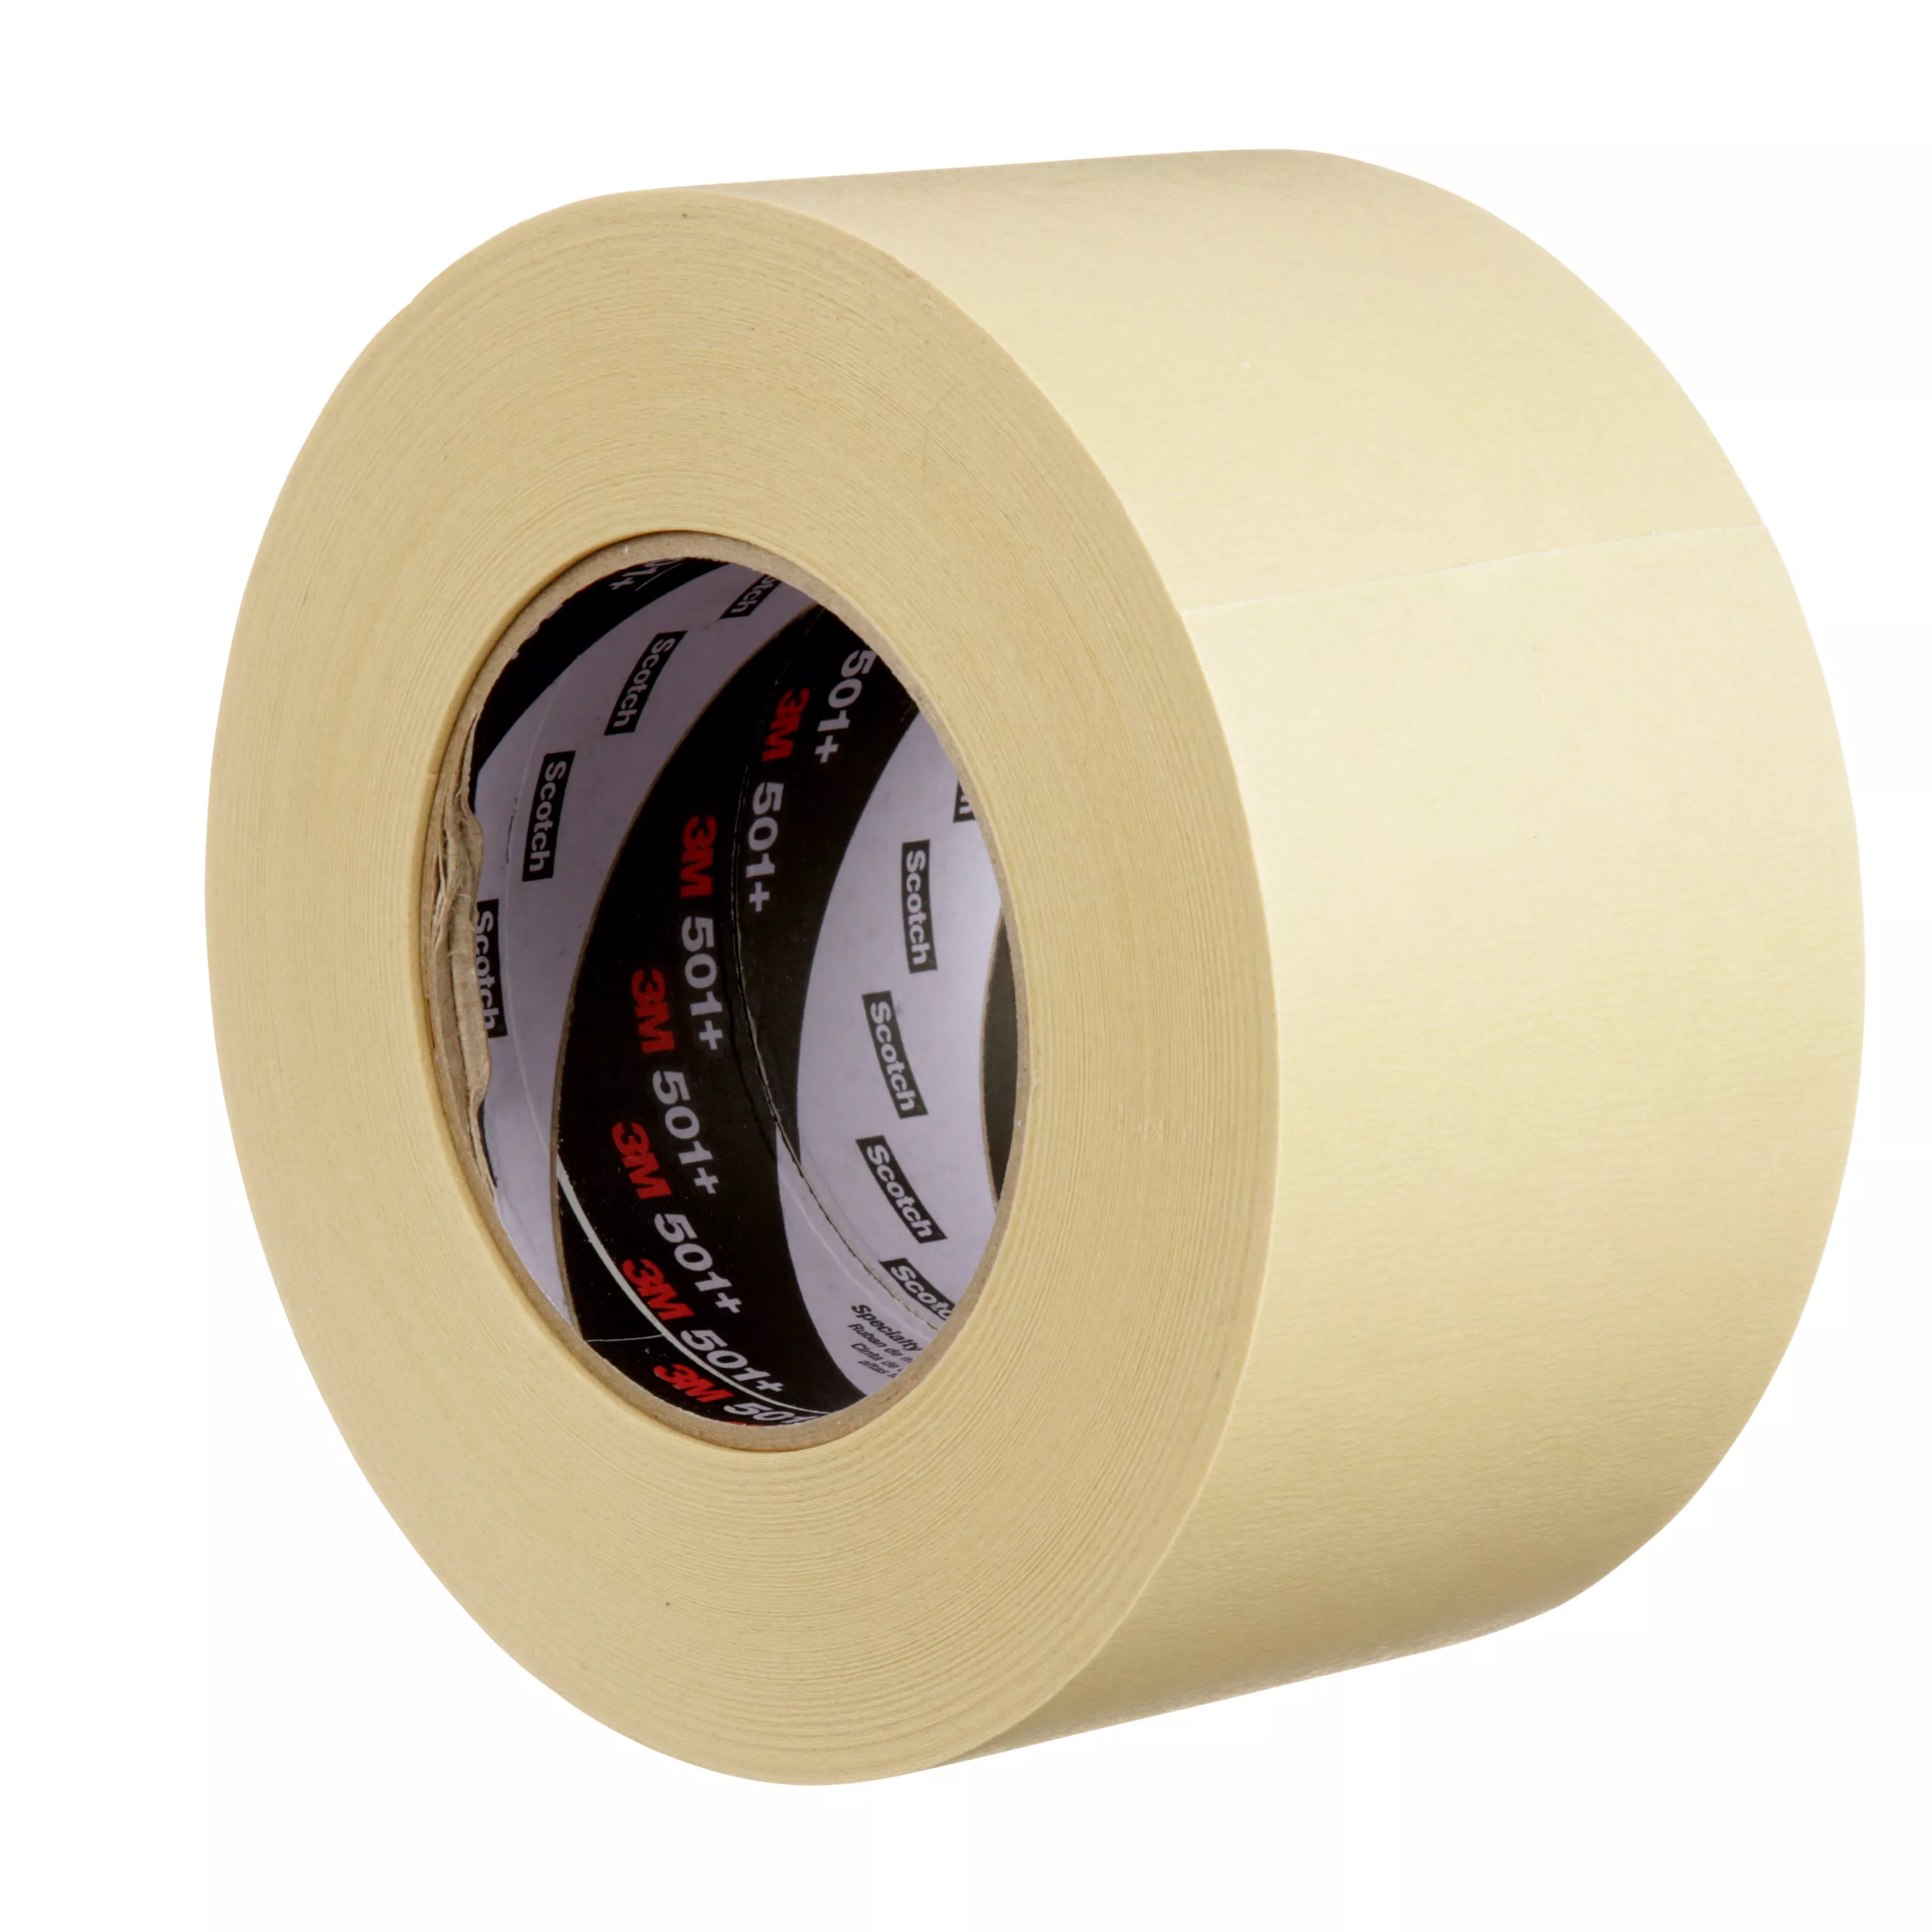 UPC  | 3M™ Specialty High Temperature Masking Tape 501+